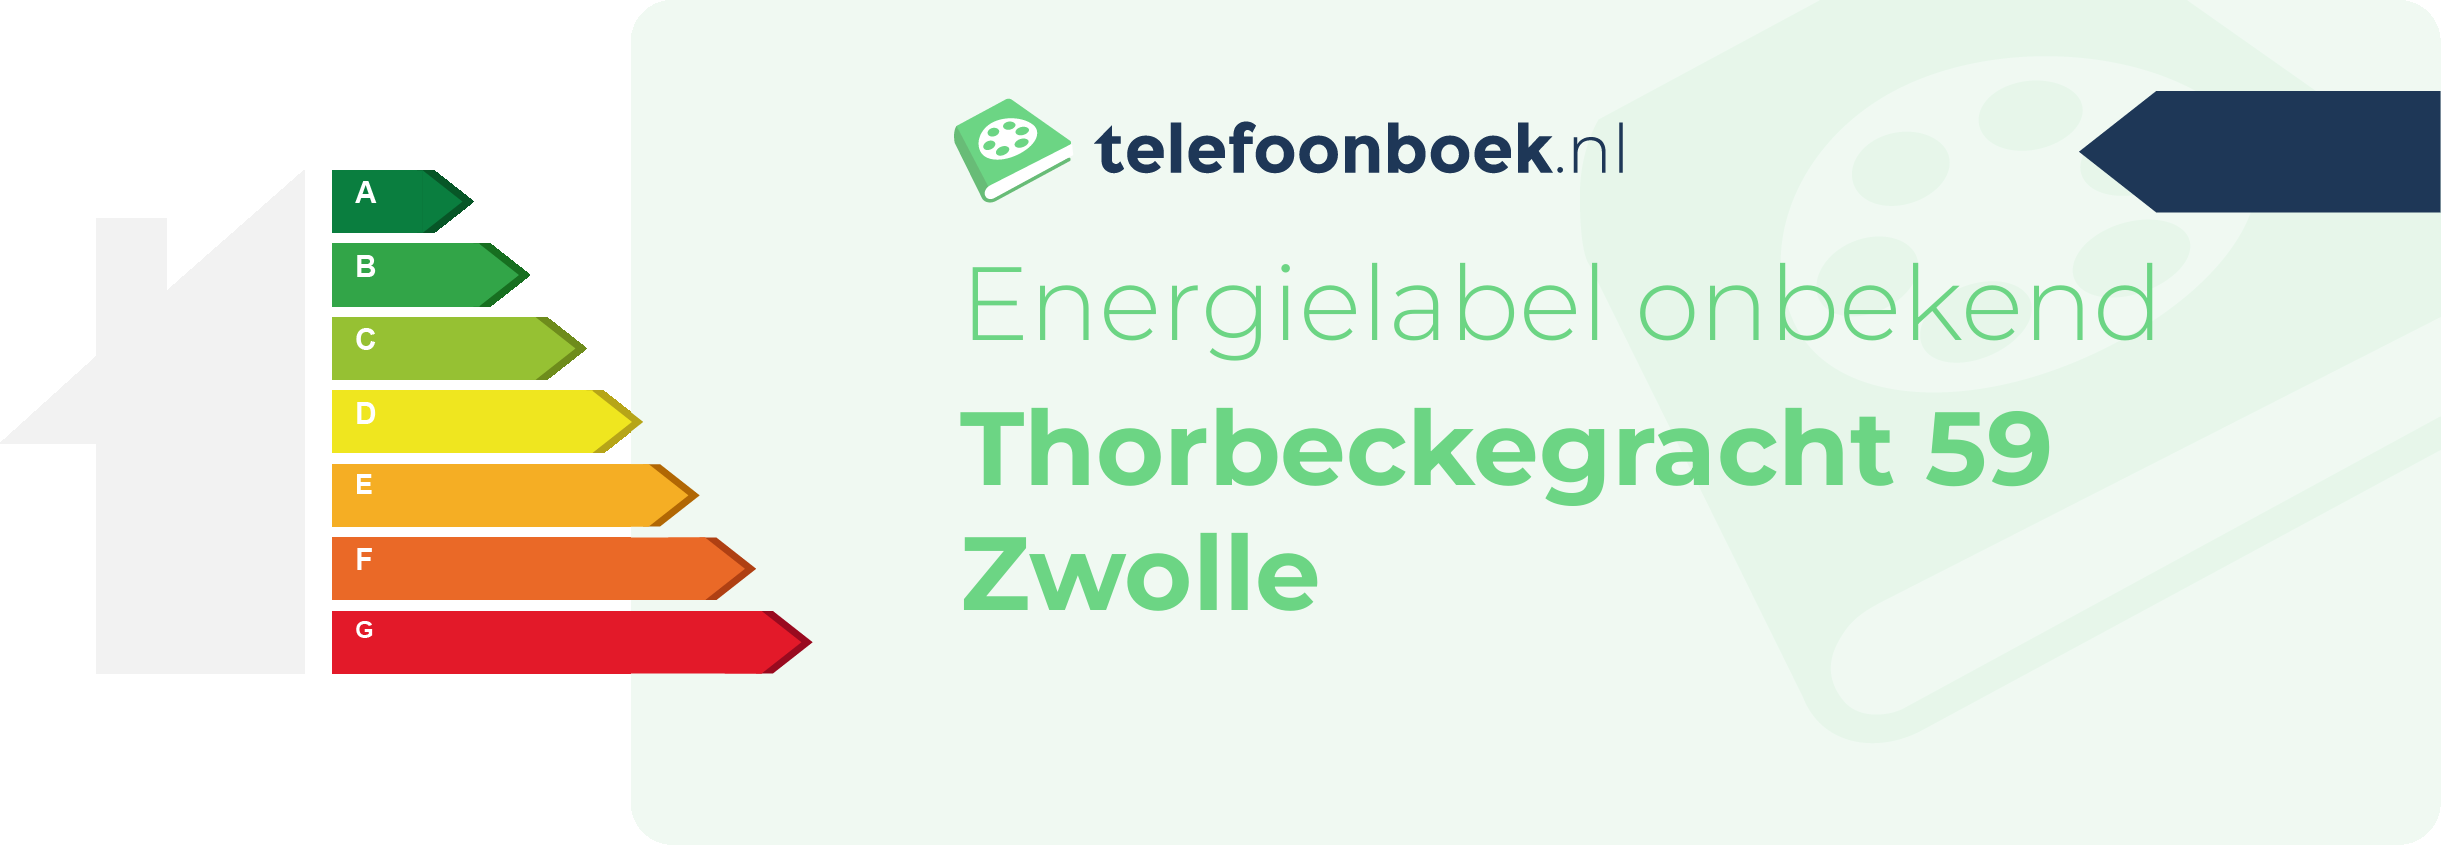 Energielabel Thorbeckegracht 59 Zwolle